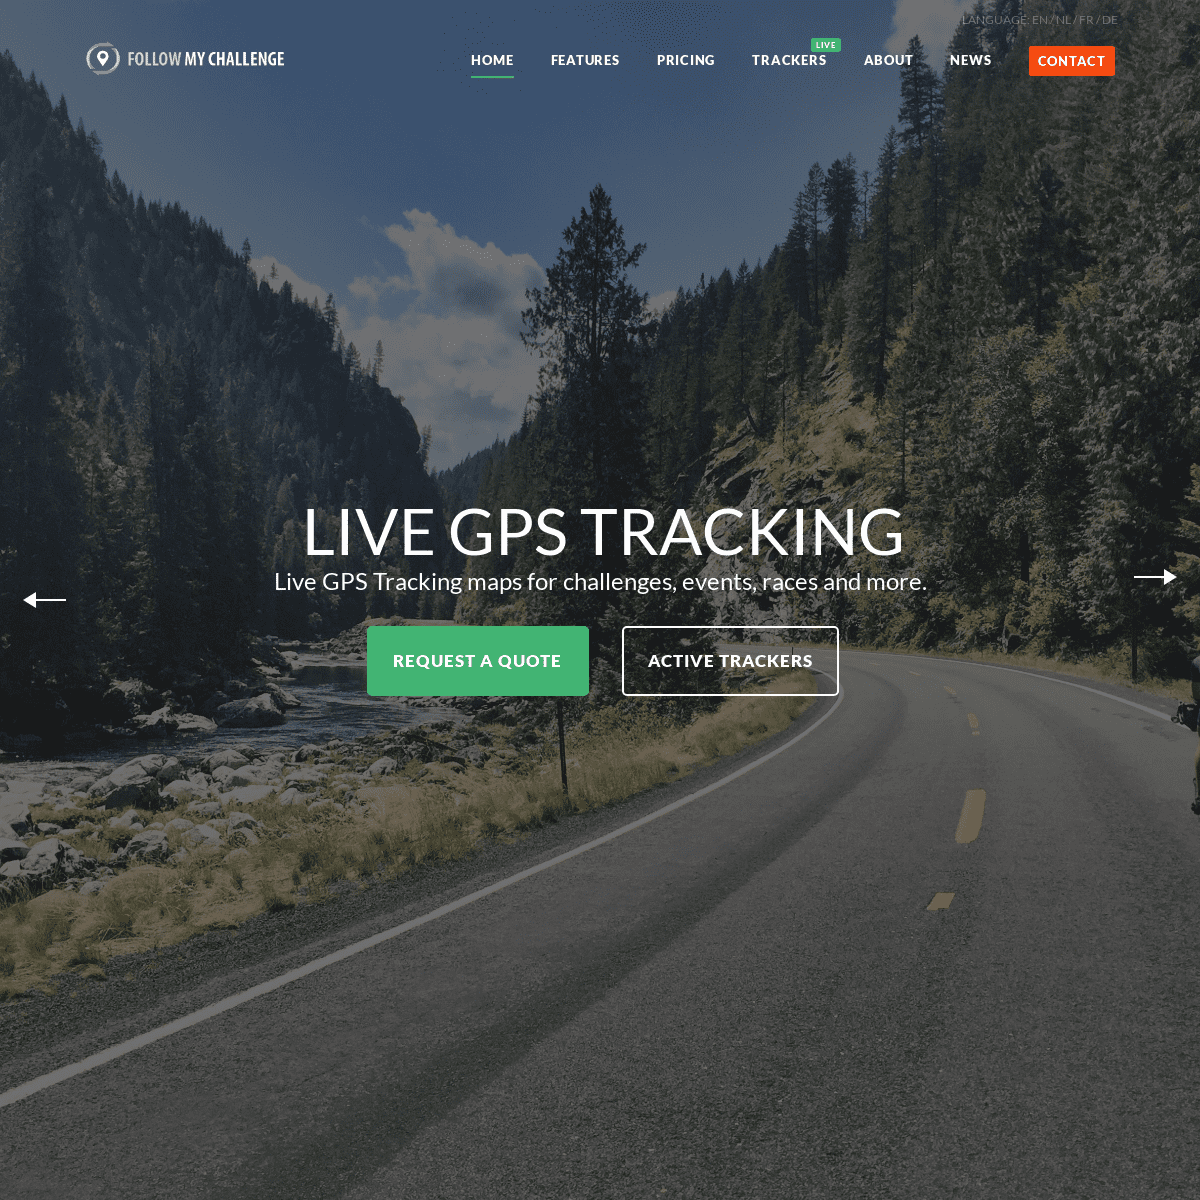 Home | Follow My Challenge | Live GPS Tracking maps for challenges, events, races and more.